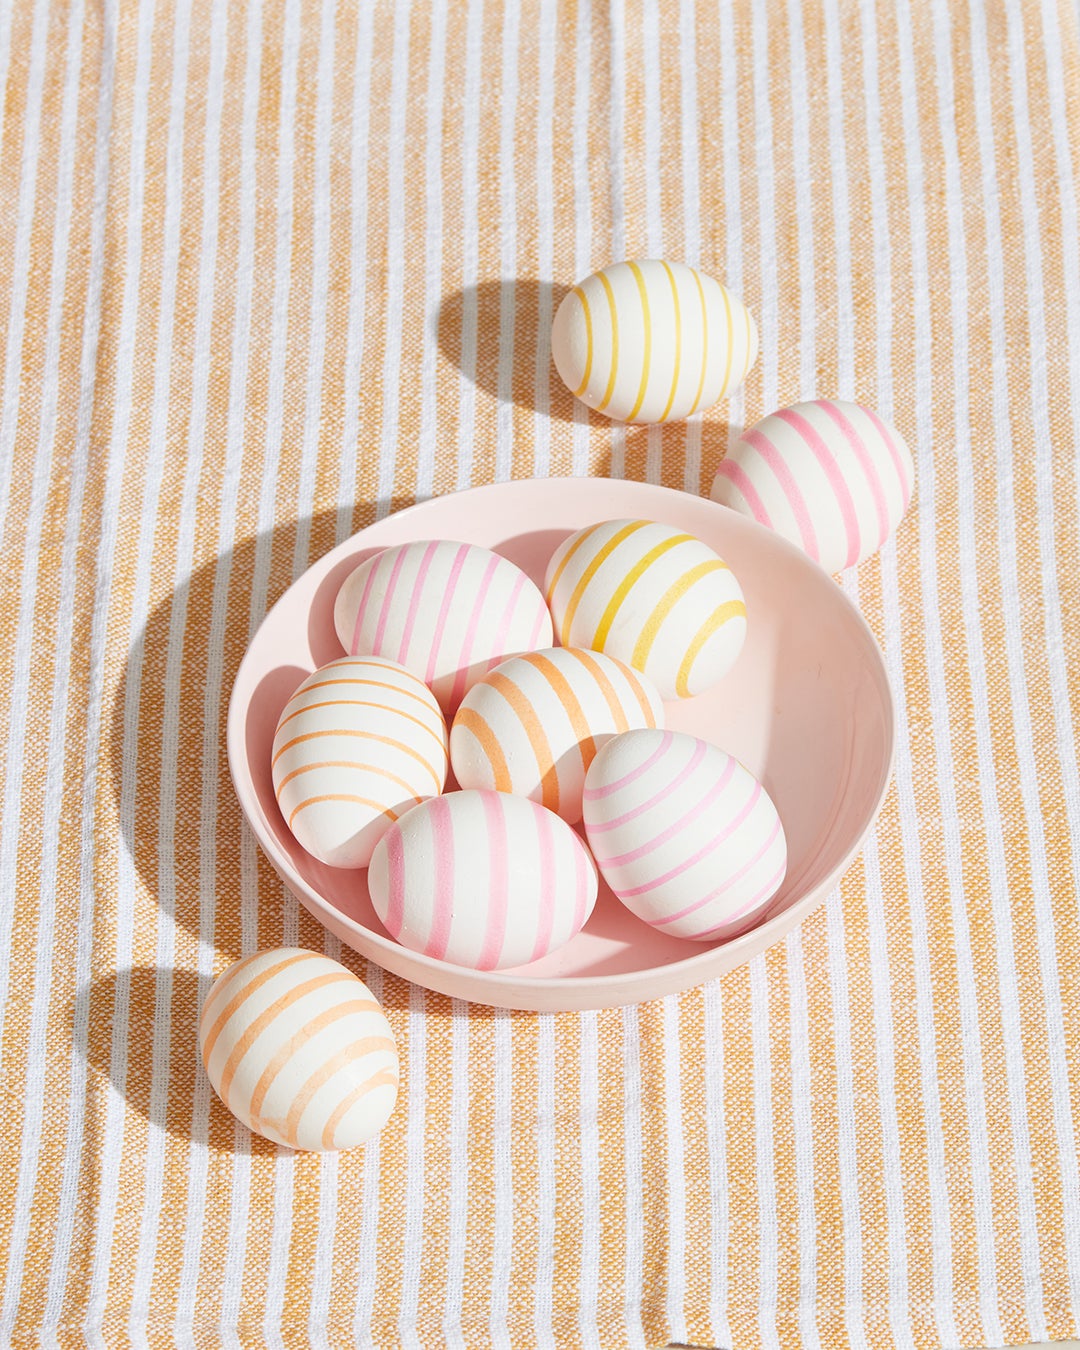 Striped Easter eggs in a bowl